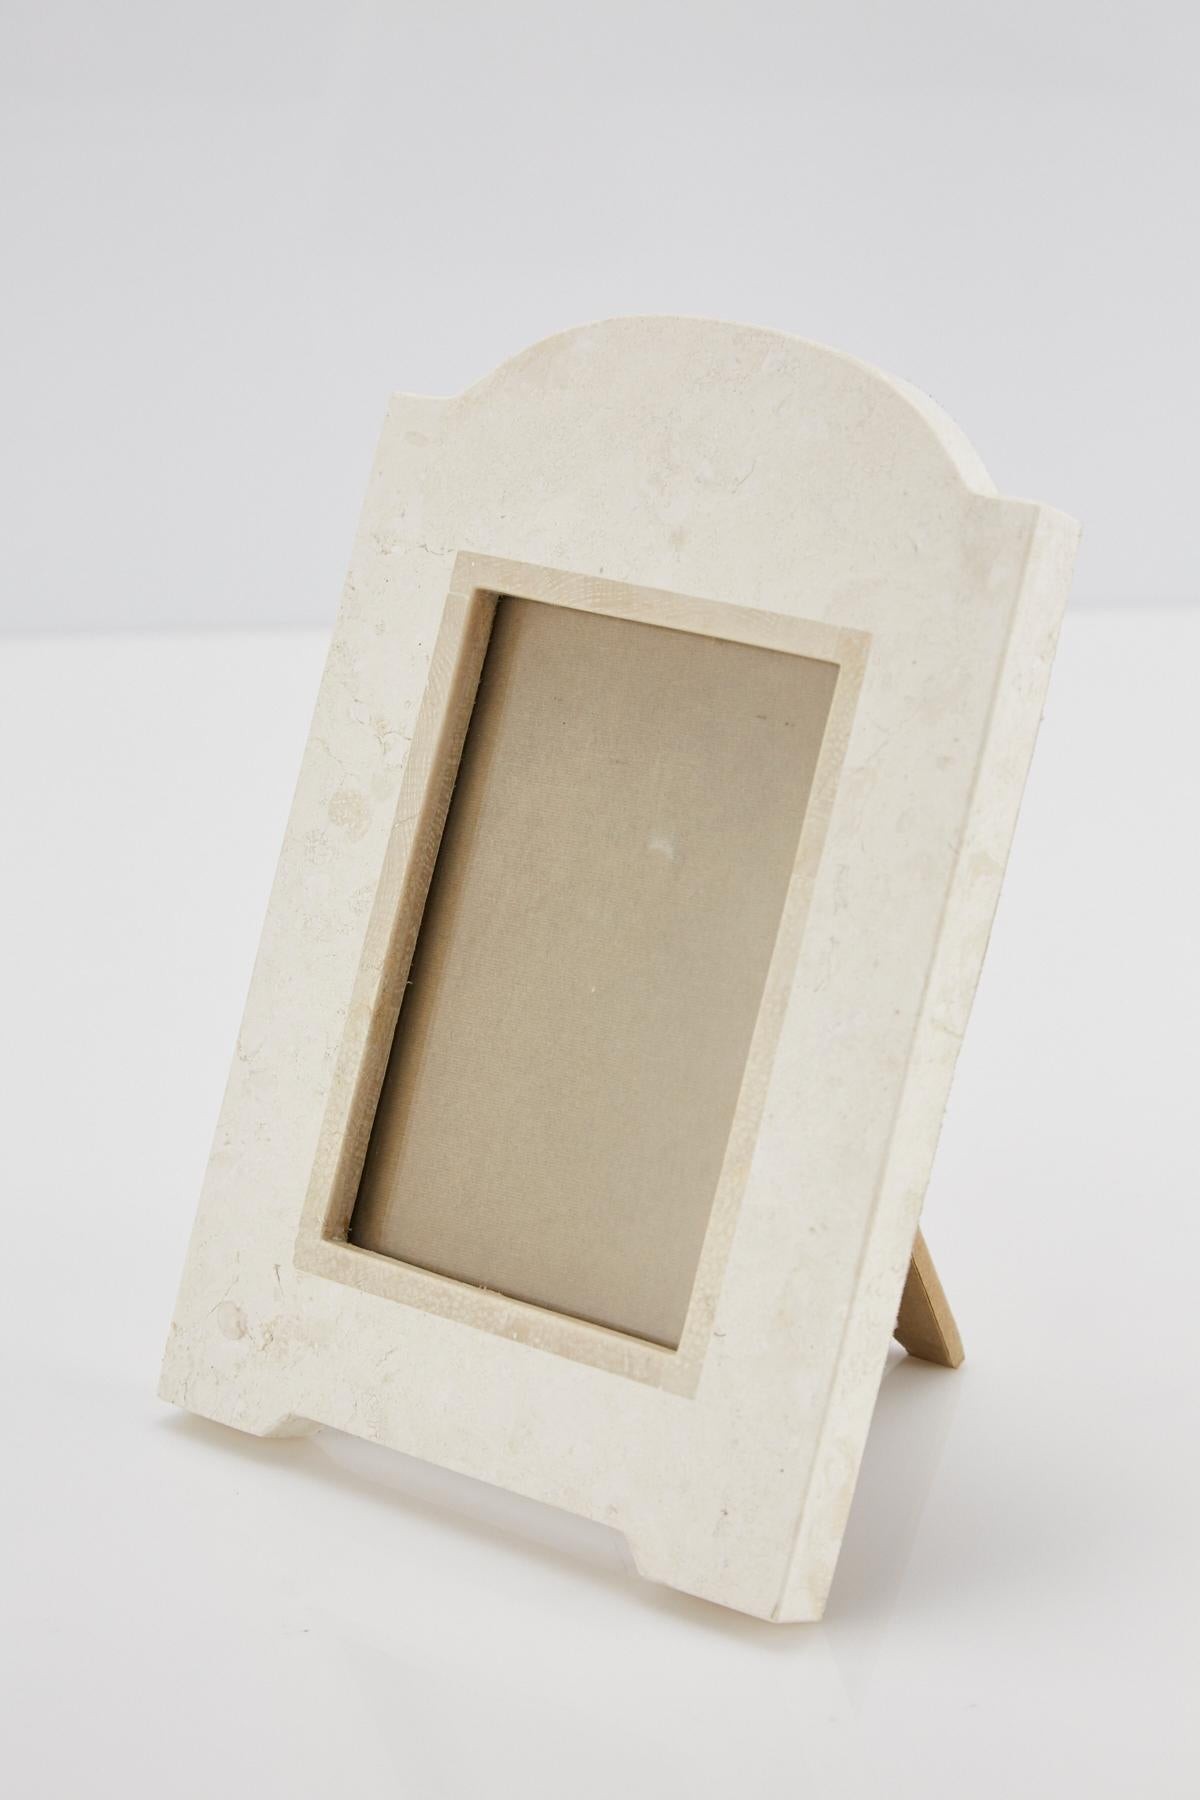 Postmodern White and Beige Arched Tessellated Stone Picture Frame, 1990s (Intarsie) im Angebot